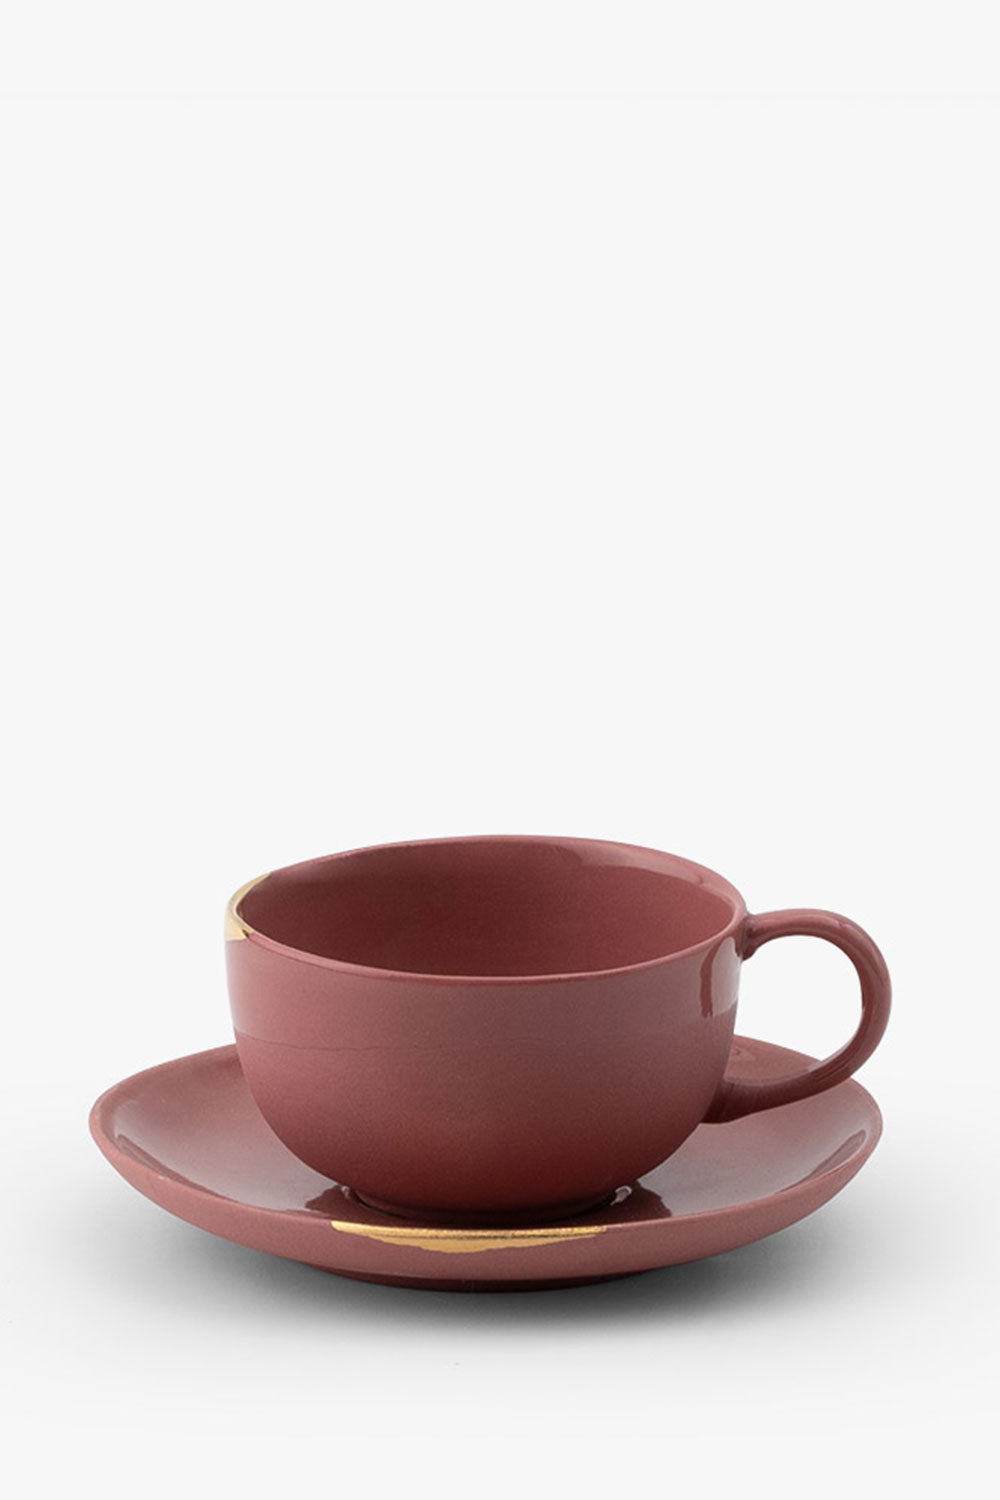 Serenity Turkish/Espresso Coffee Cup, Set of 2, Mulberry